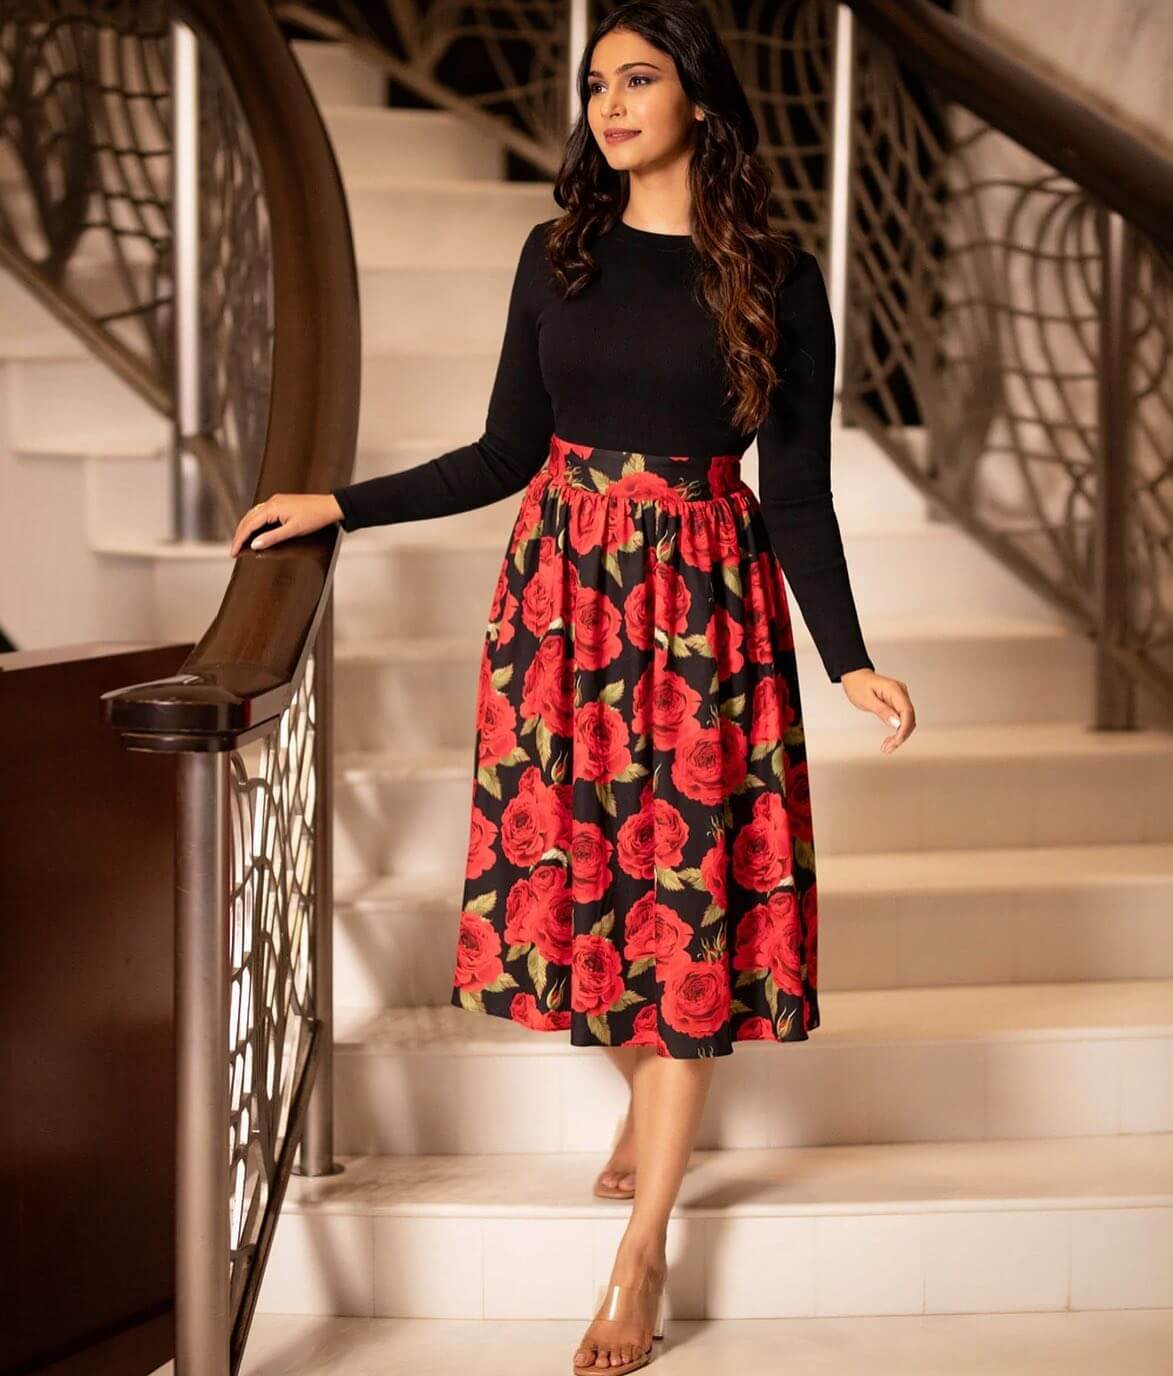 Shamata Anchan Flattering Look In Black Full Sleeves Solid Top With Black & Red Floral Print Skirt